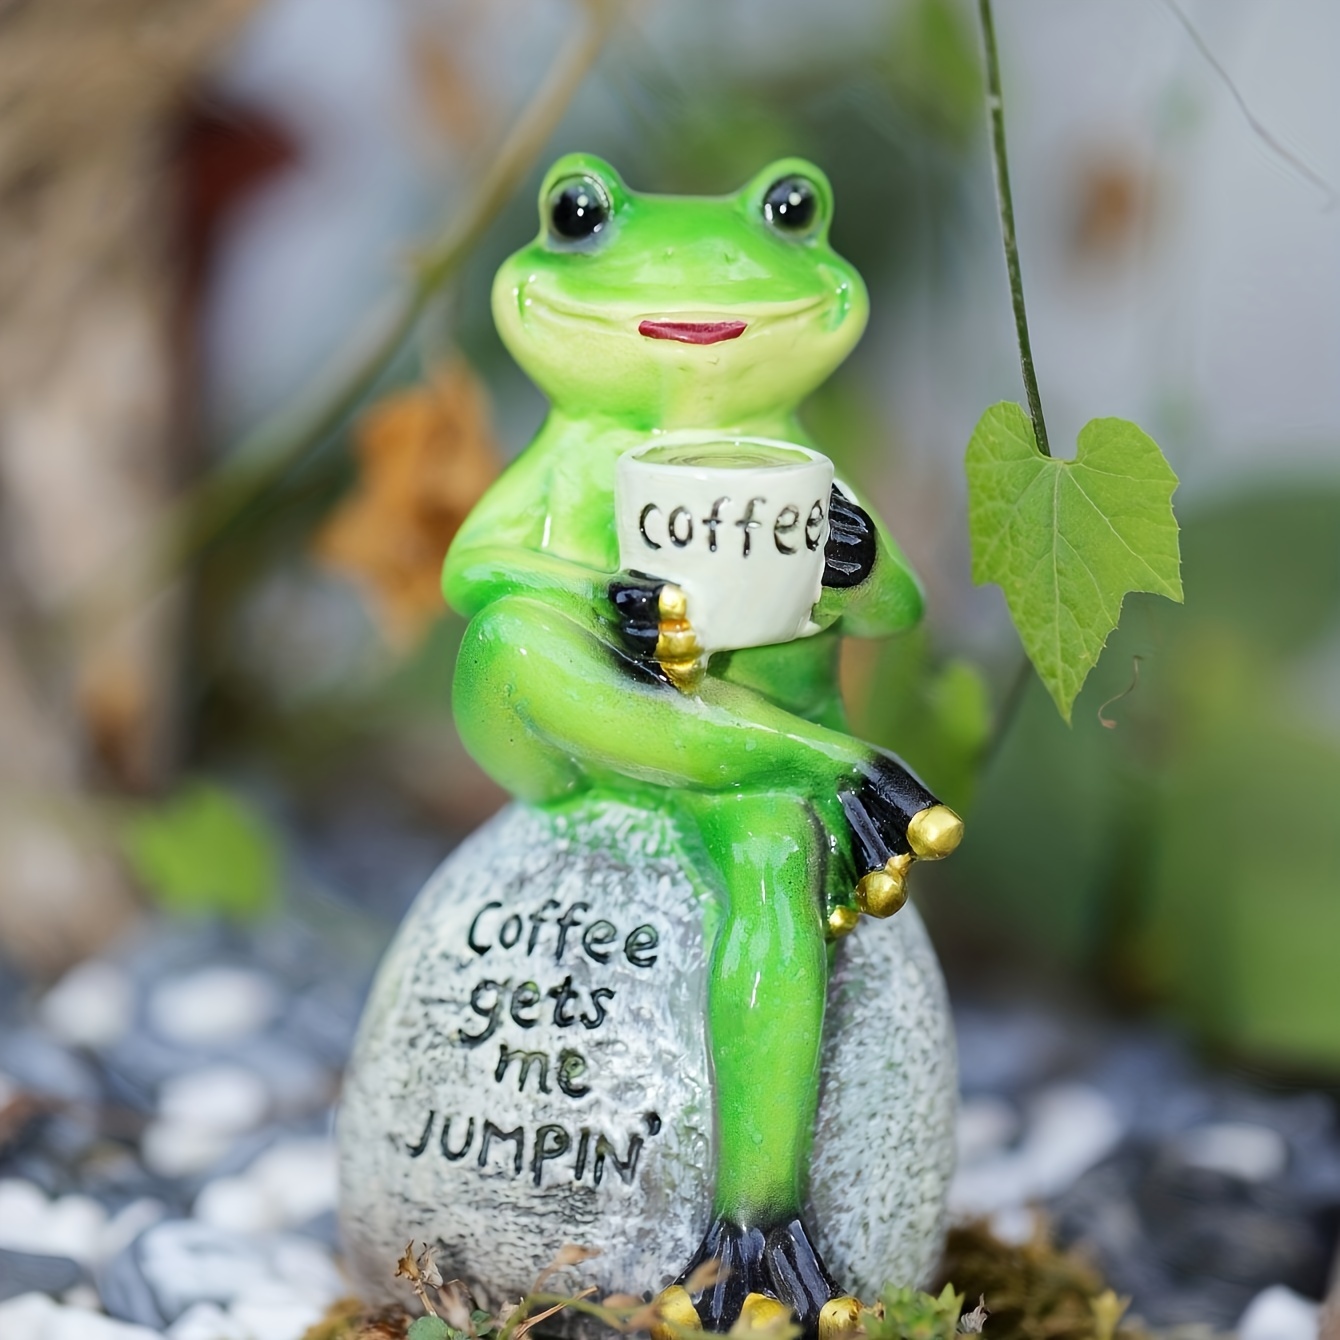 

Charming Coffee-loving Frog Figurine - Resin Crafted Desk Decor Adds A Whimsical Touch To Any Coffee Nook